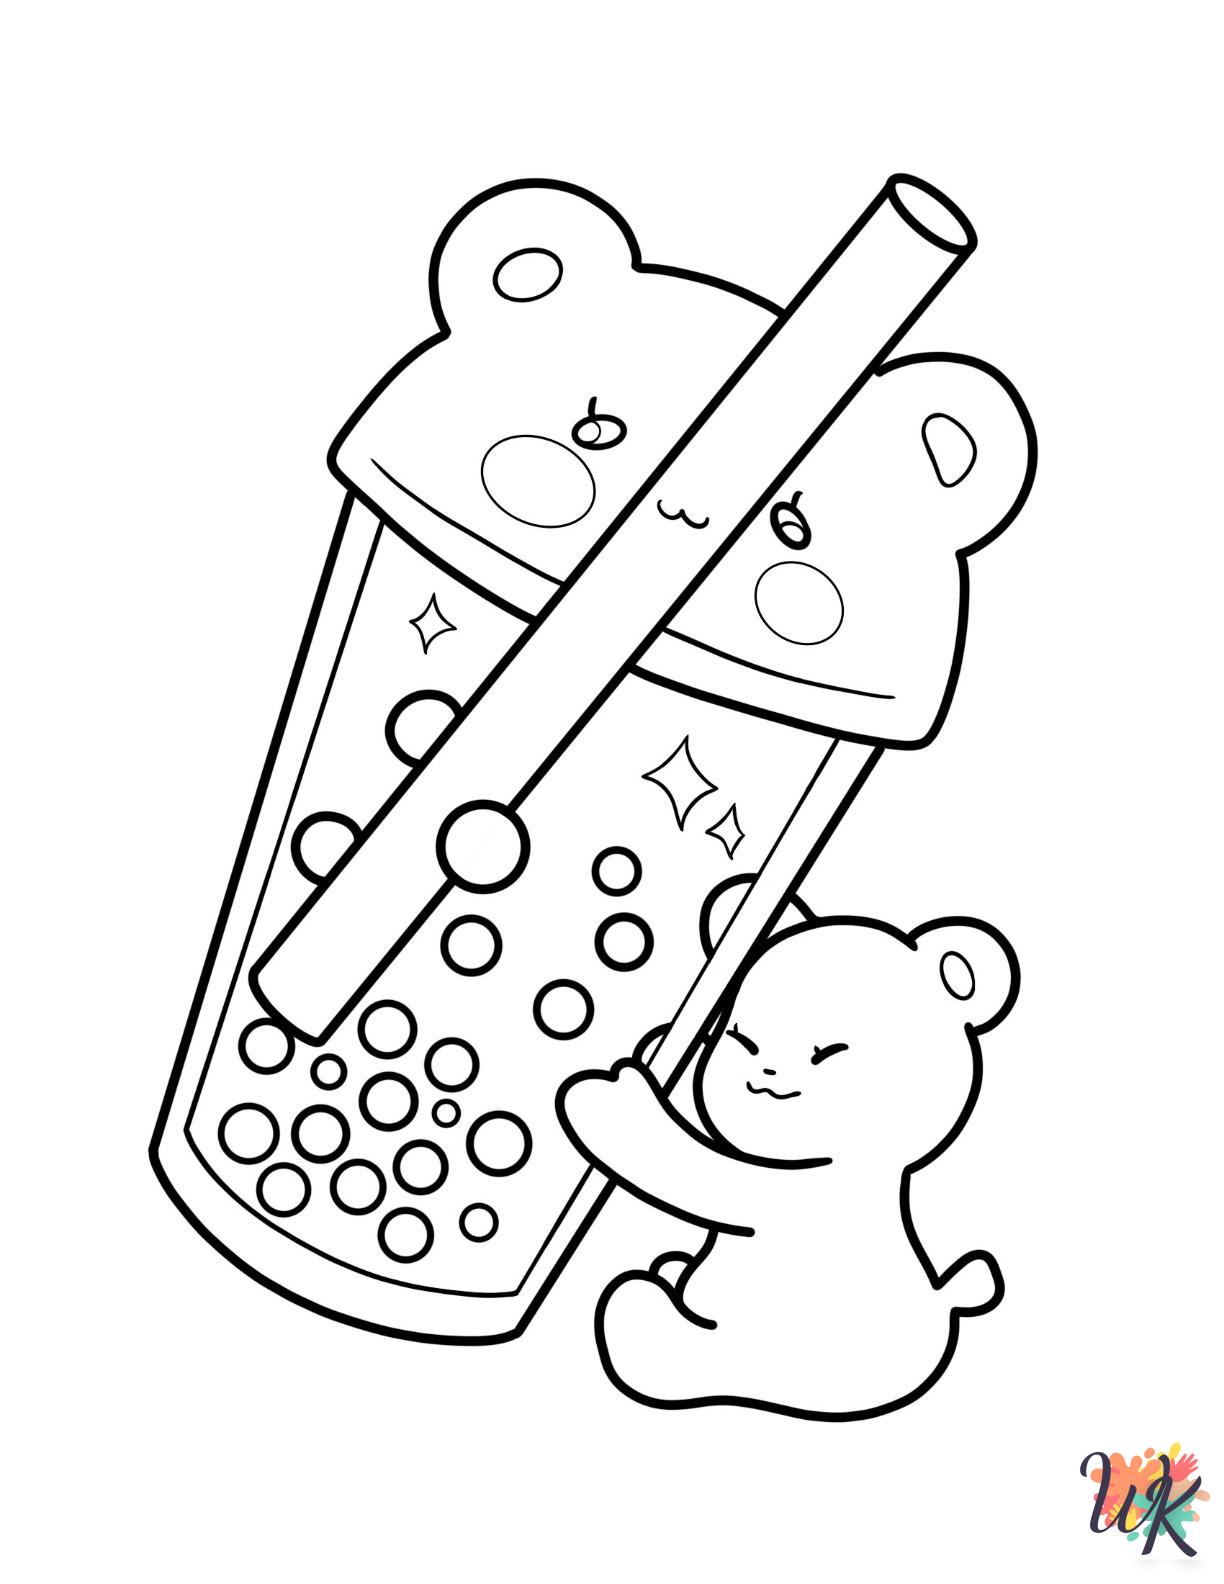 detailed Boba Tea coloring pages for adults